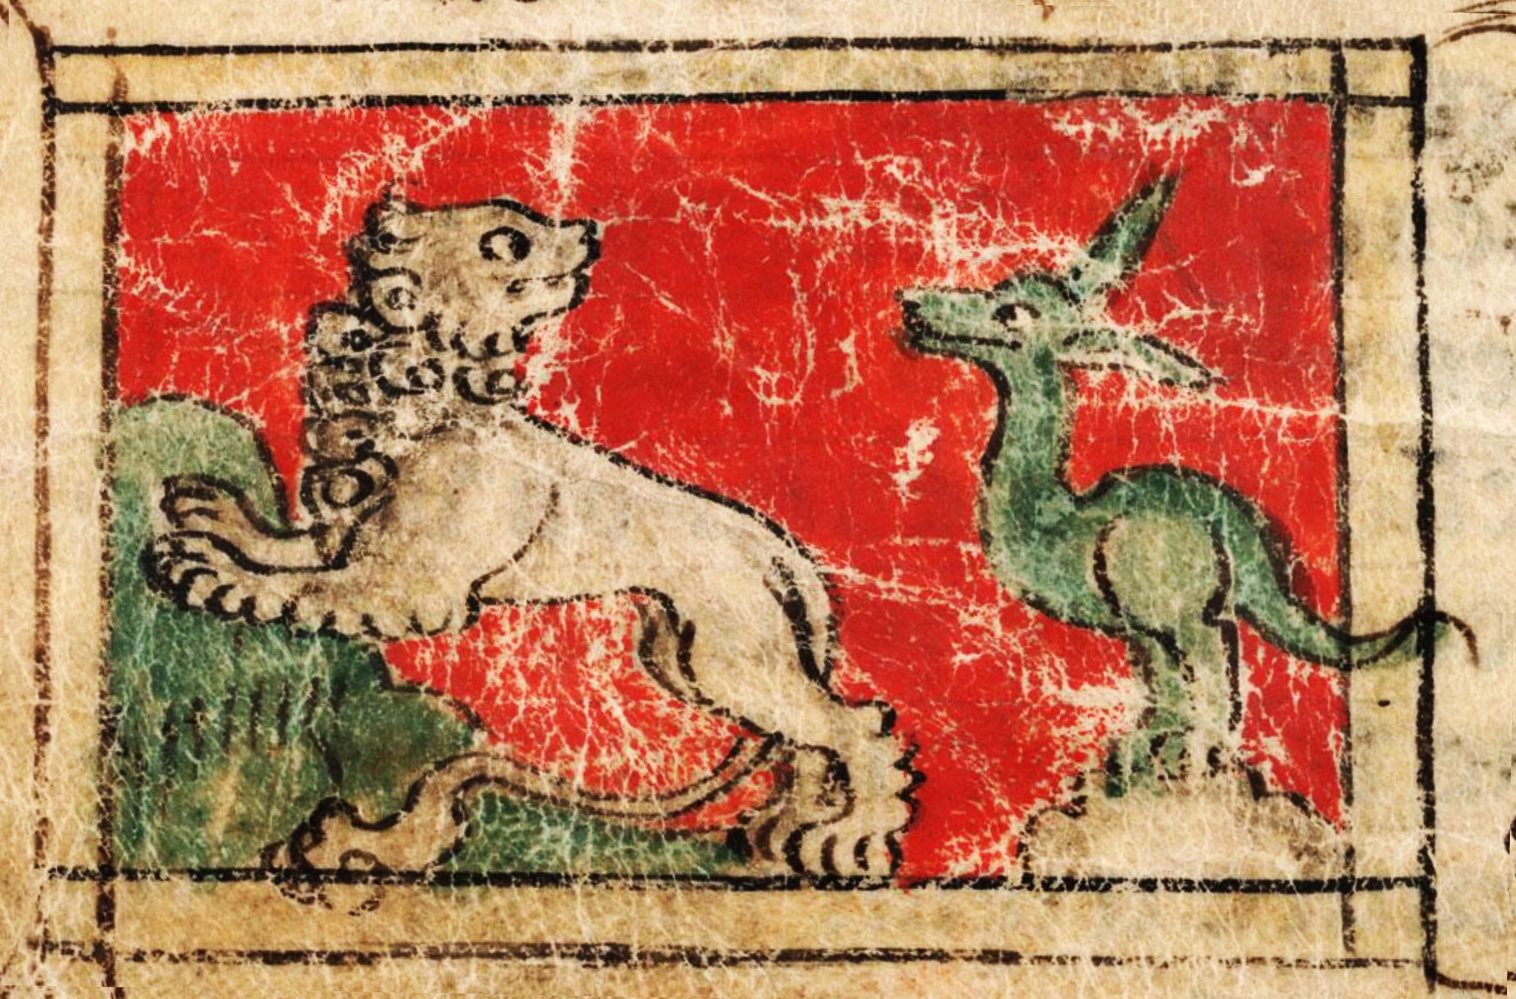 An image from a medieval bestiary book depicting a lion and a small dinosaur-like creature call a leontophone chasing it.